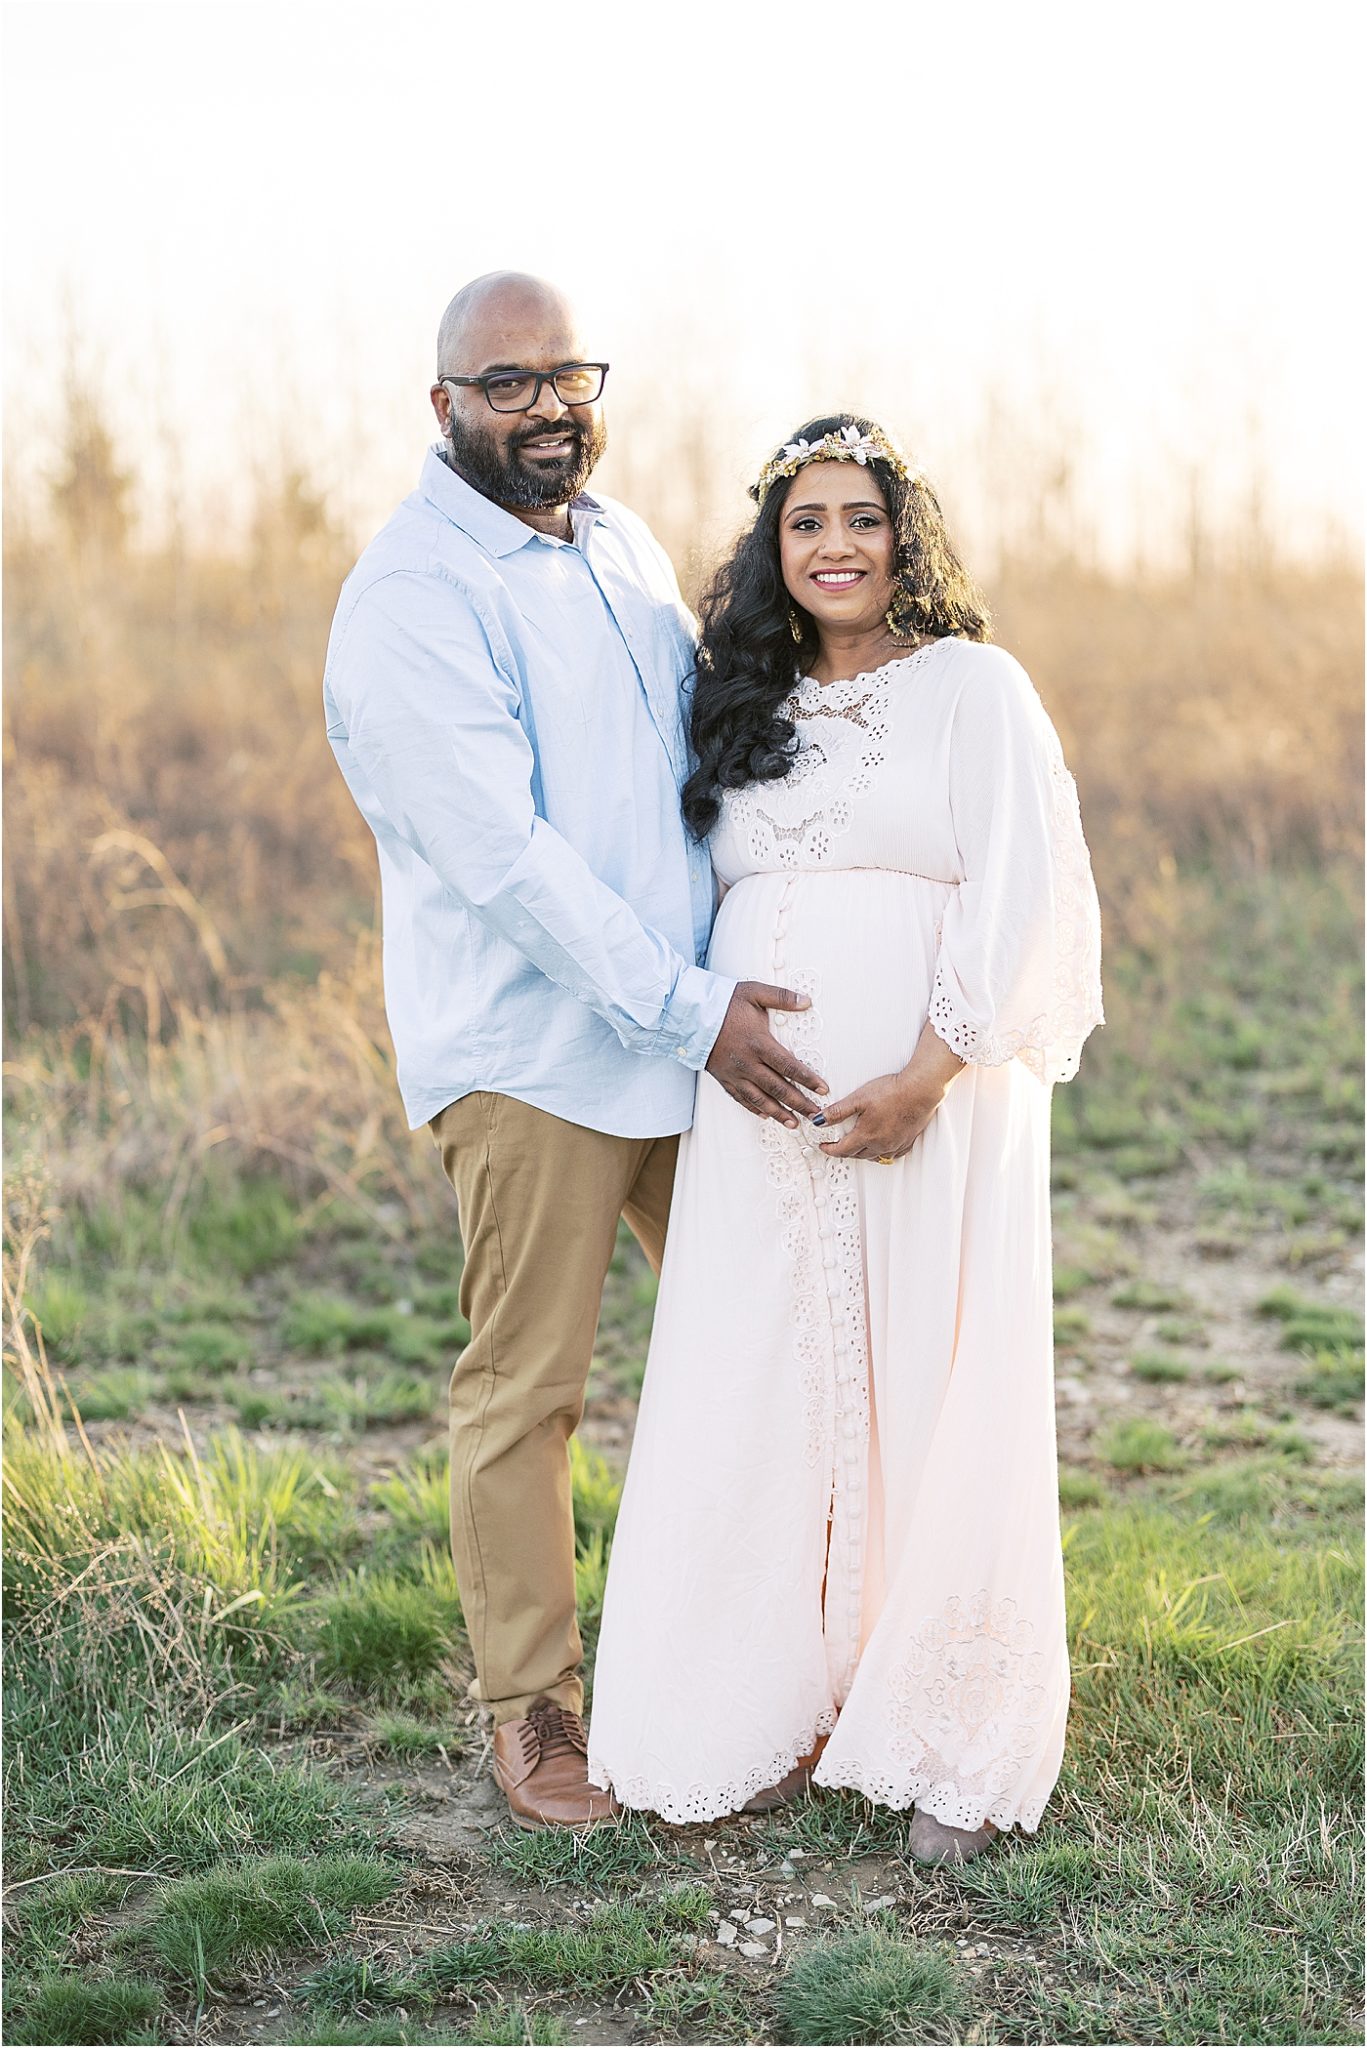 Parents to be during maternity photos with Lindsay Konopa Photography in Fishers Indiana.